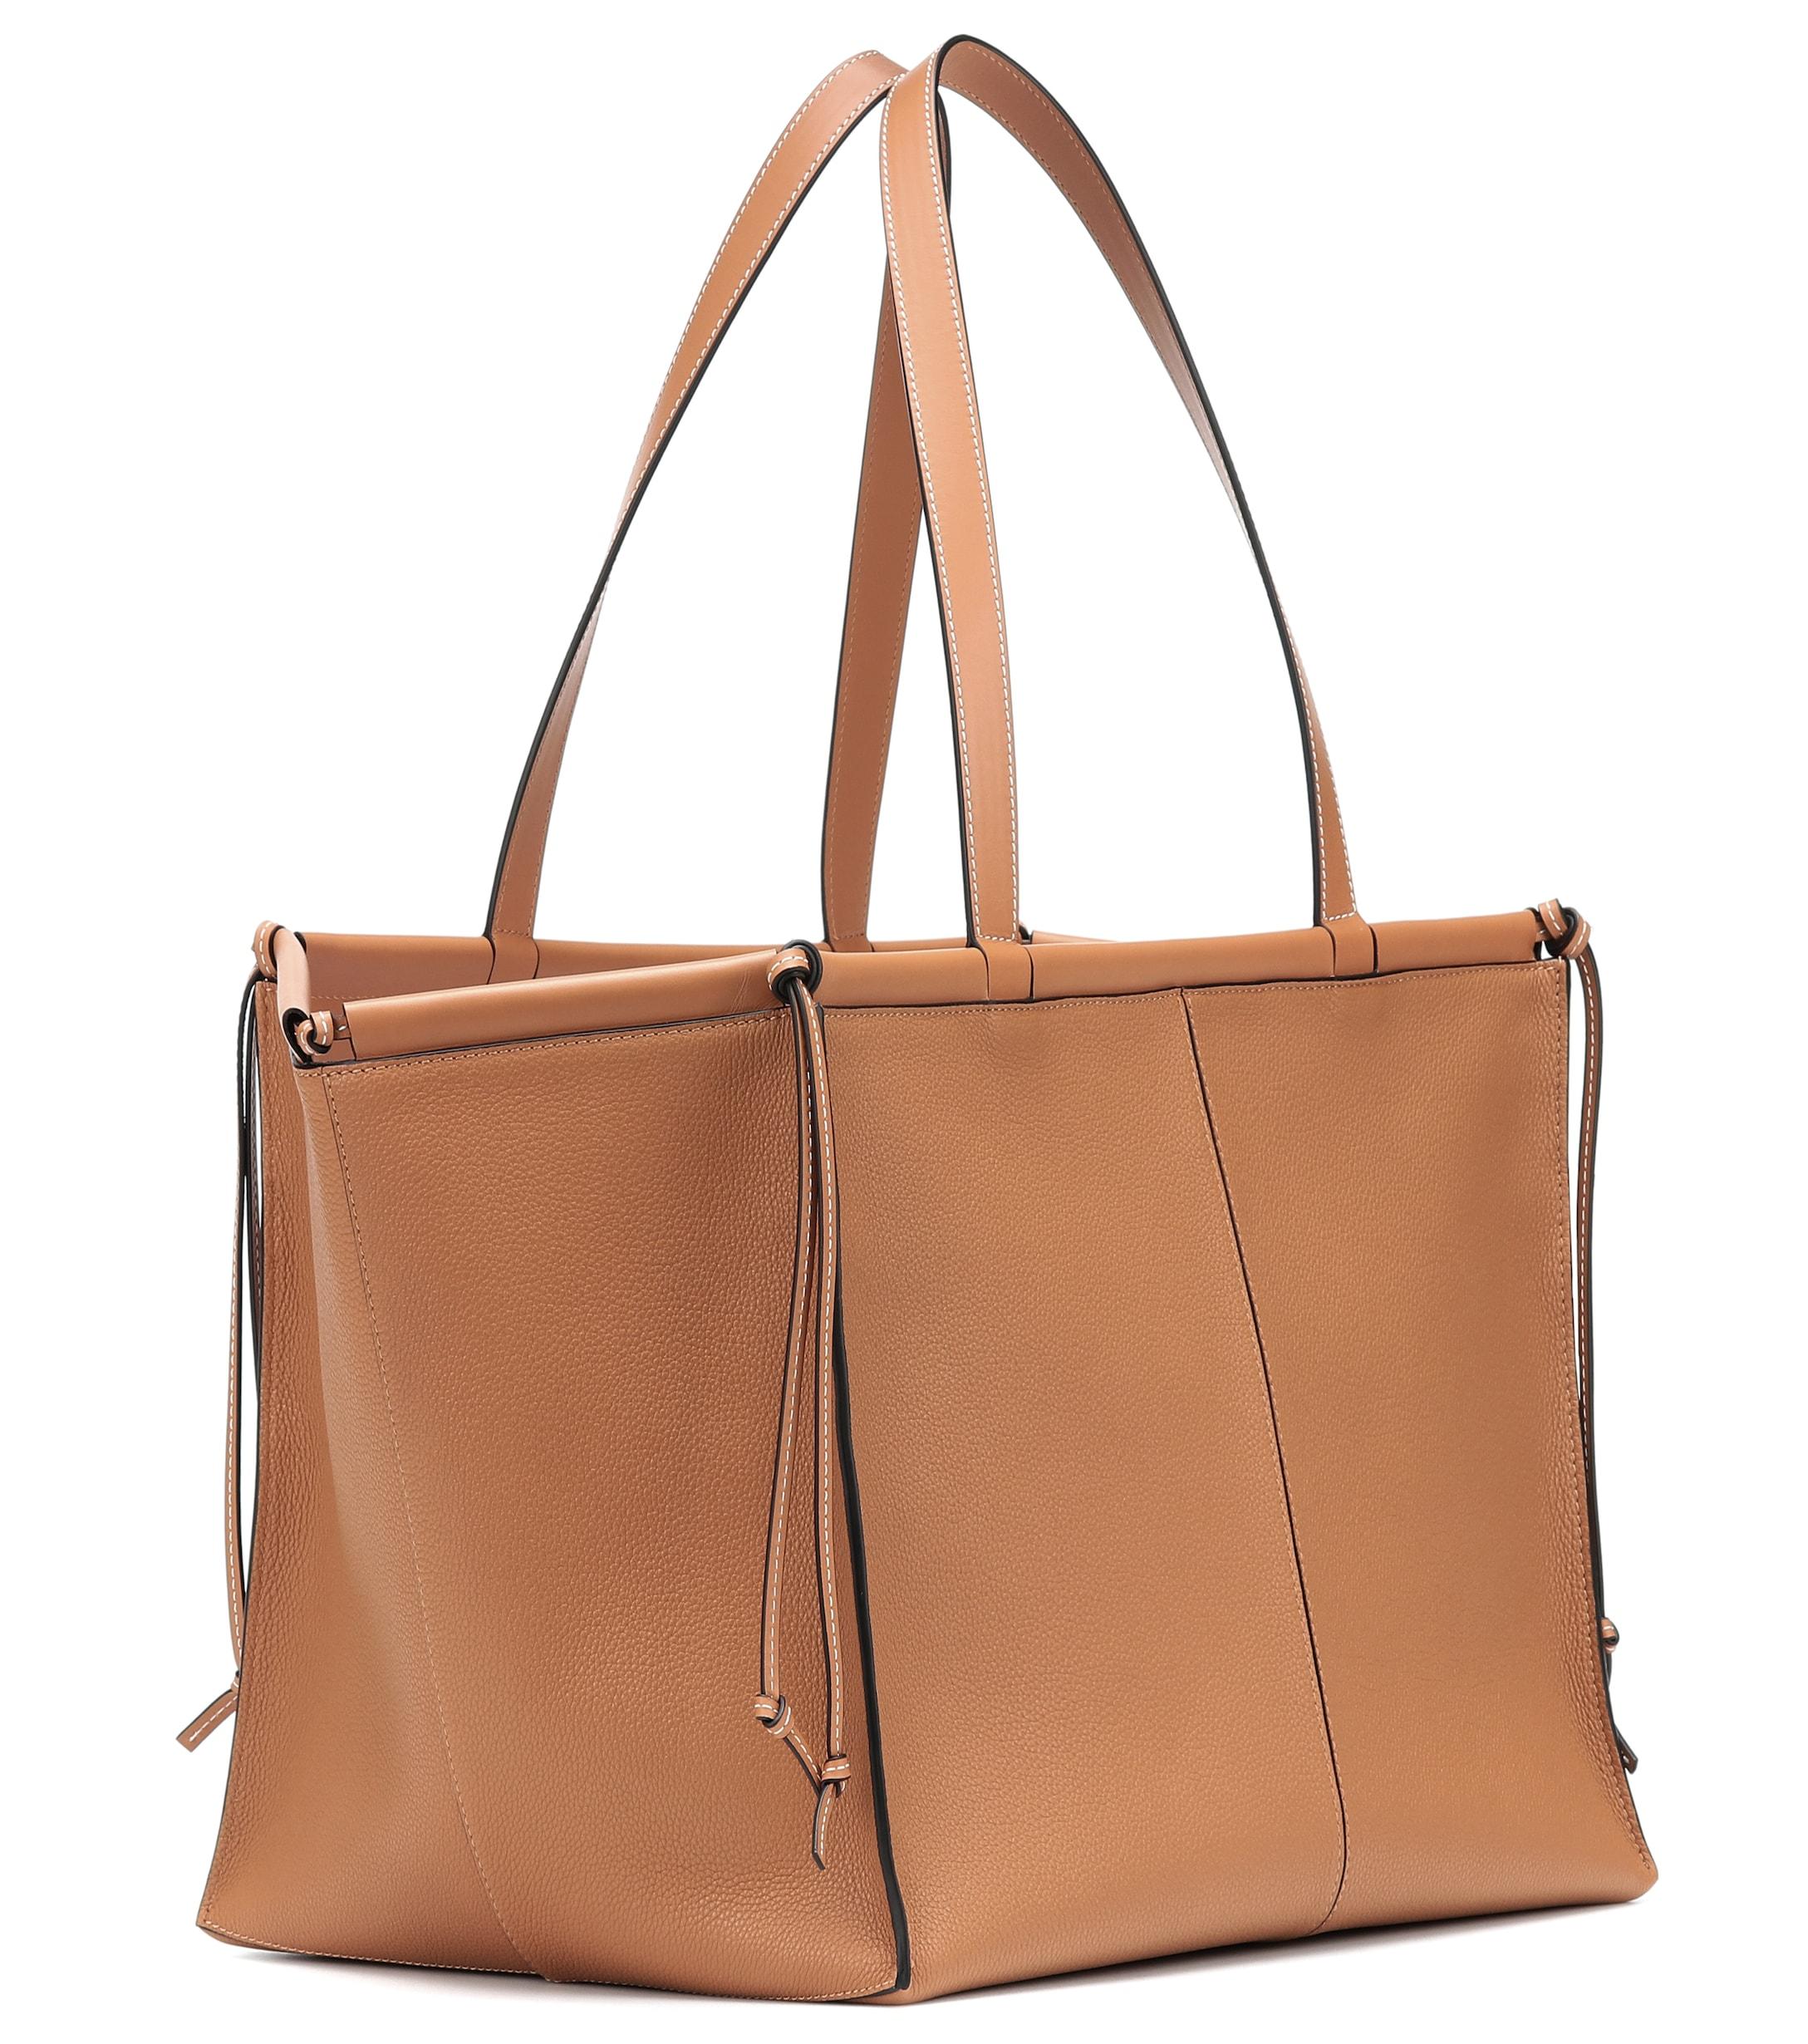 Loewe Cushion Large Leather Tote in Brown - Lyst